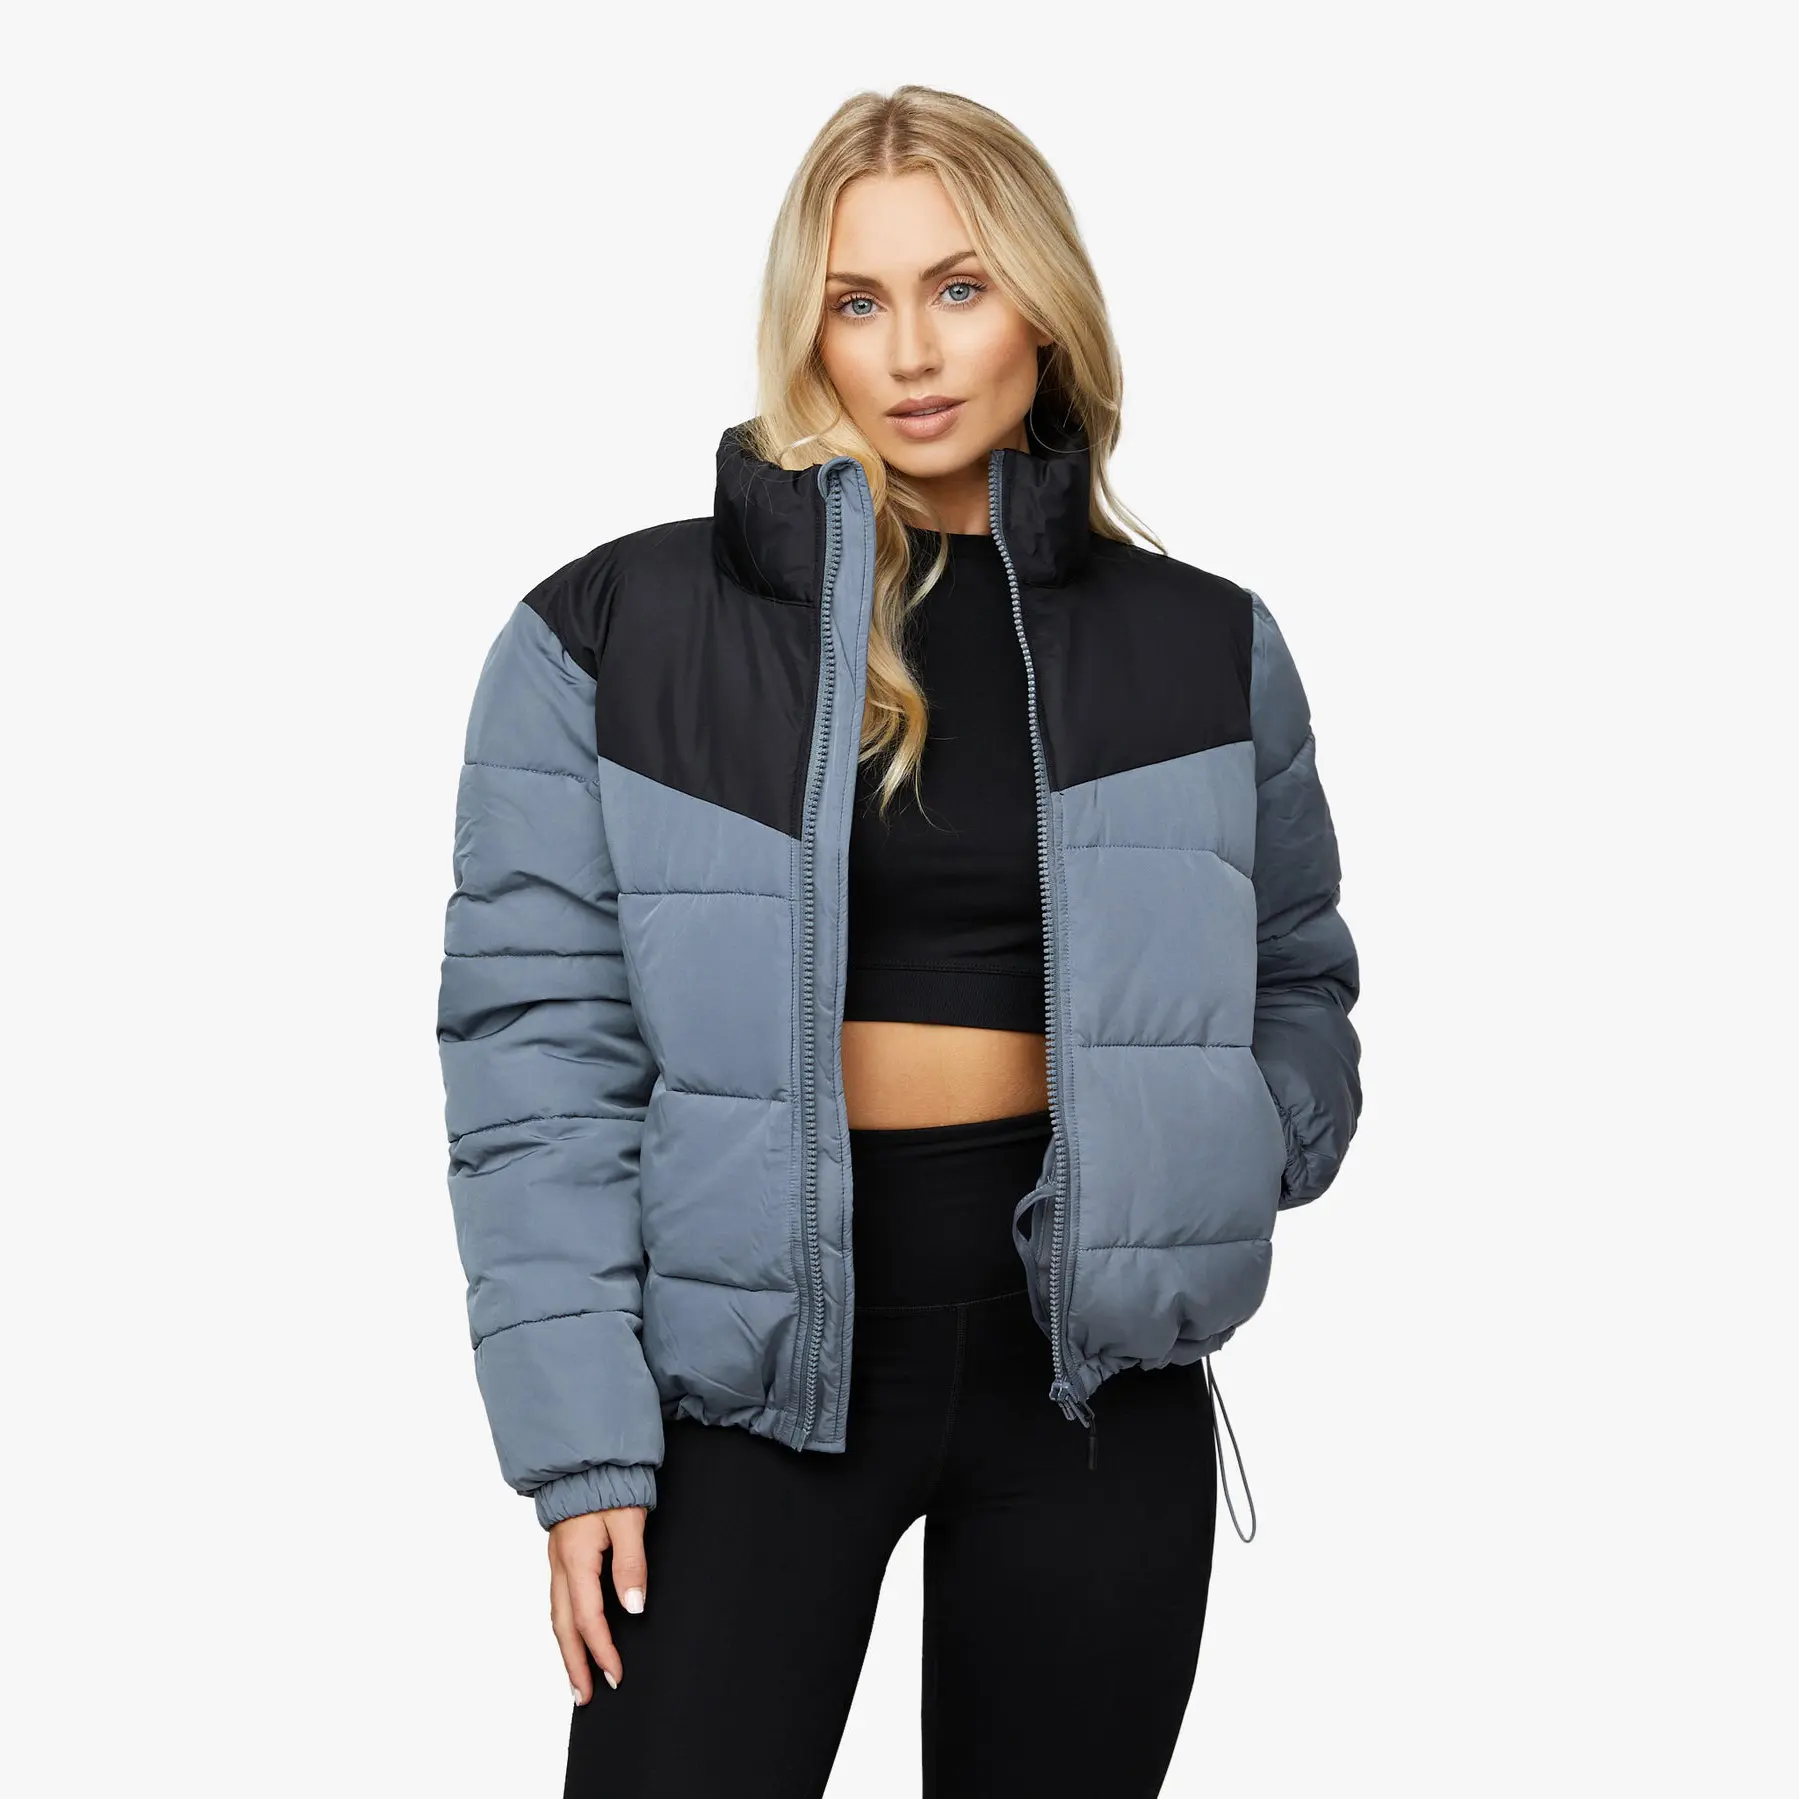 2023 Winter Puffer Jacket Ladies Warm Hooded Cotton-Padded clothes Slim Winter Jackets Women Coats